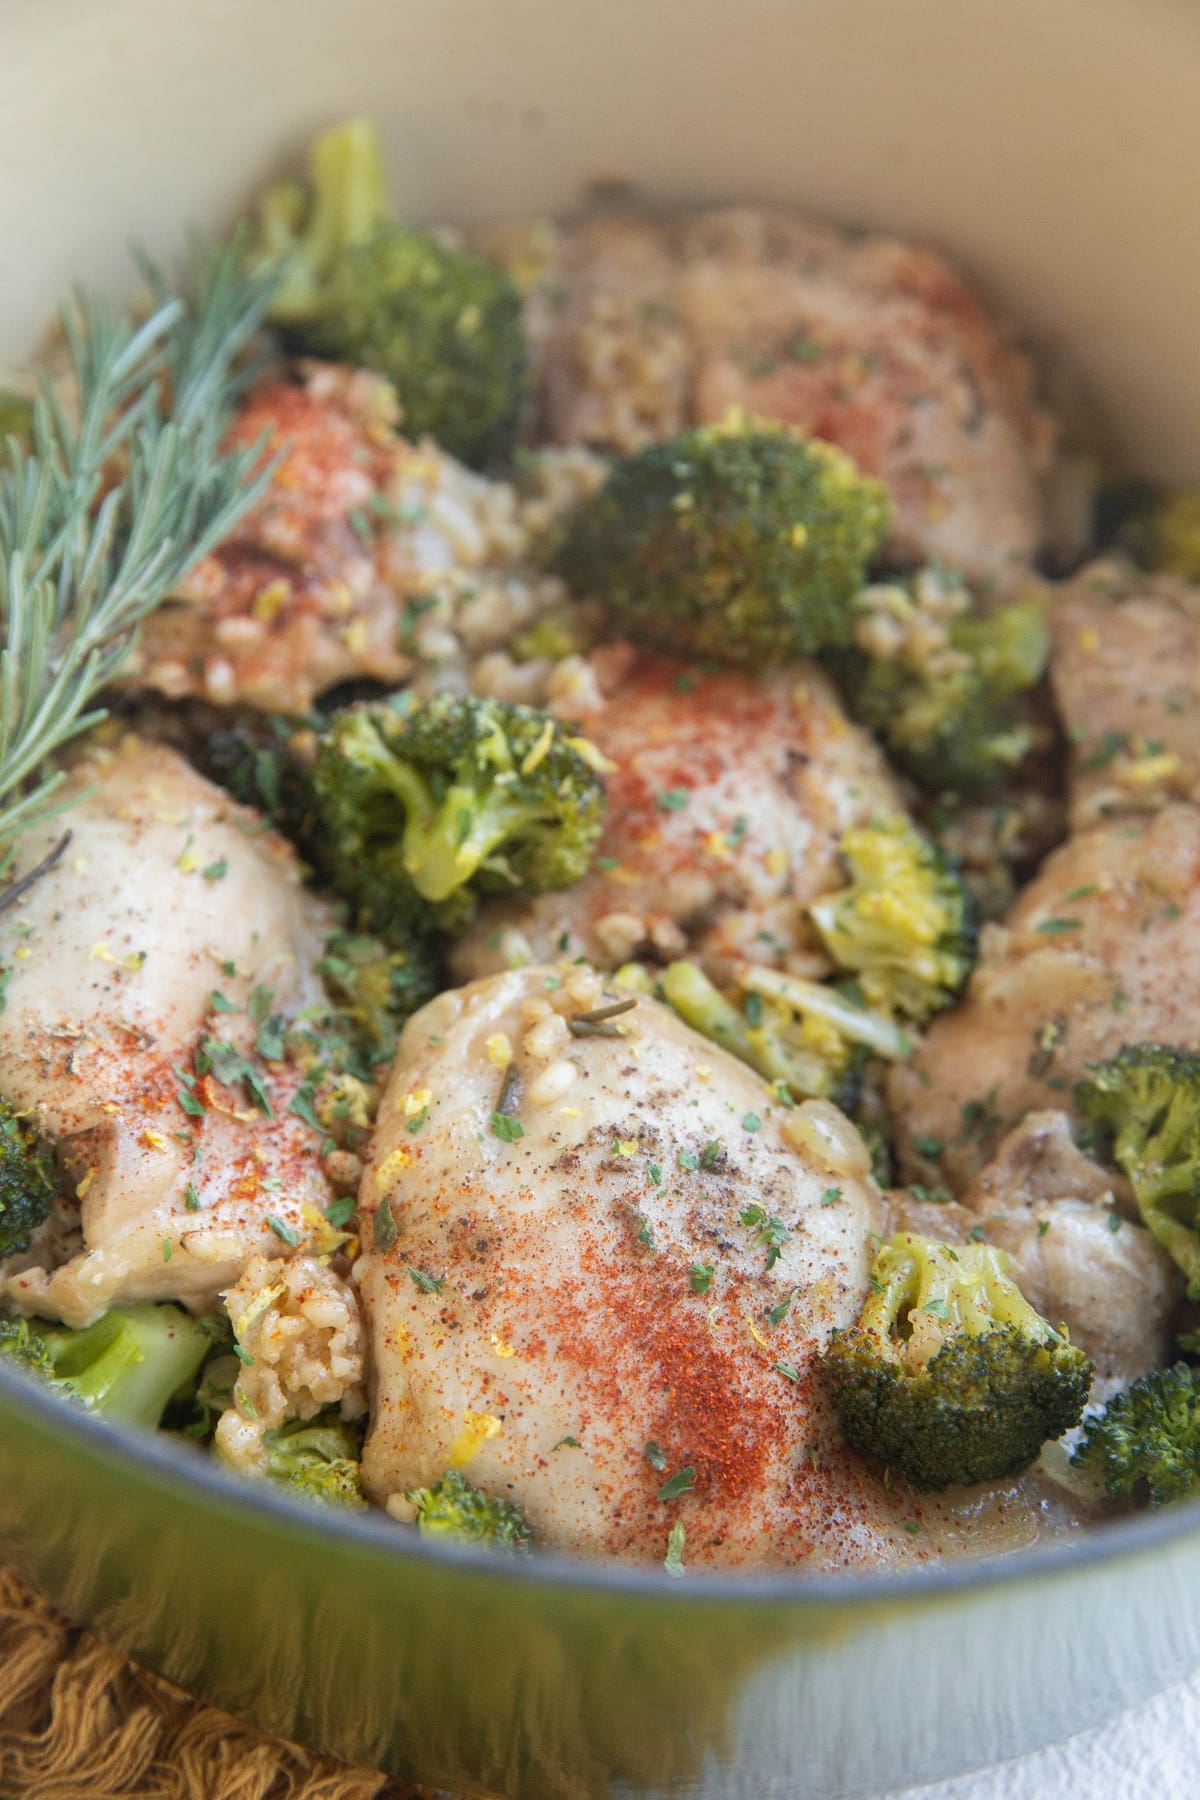 Pot of cooked chicken thighs and brown rice with broccoli and rosemary.